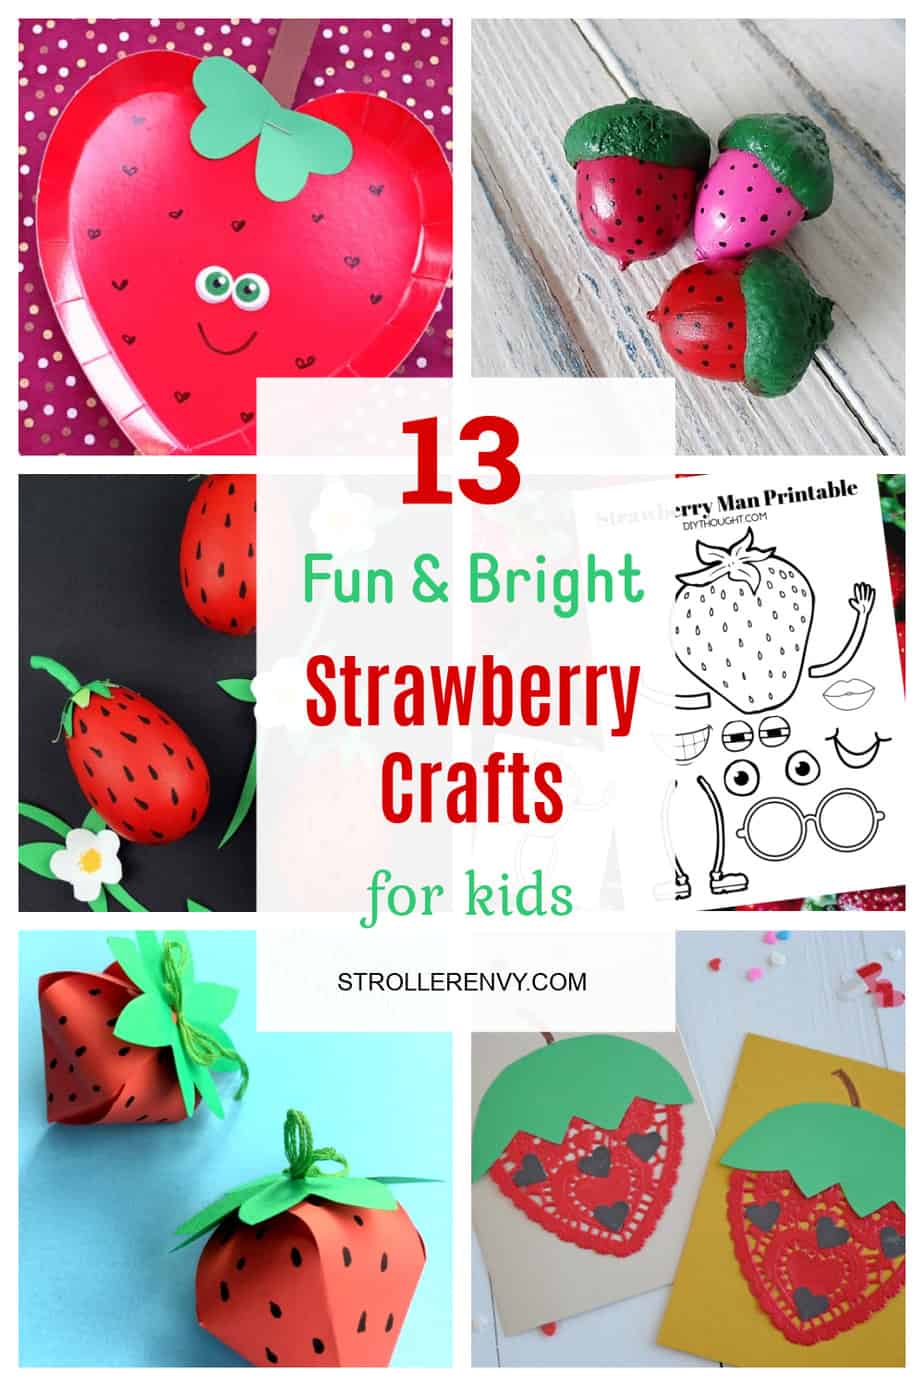 Strawberry Crafts for Kids